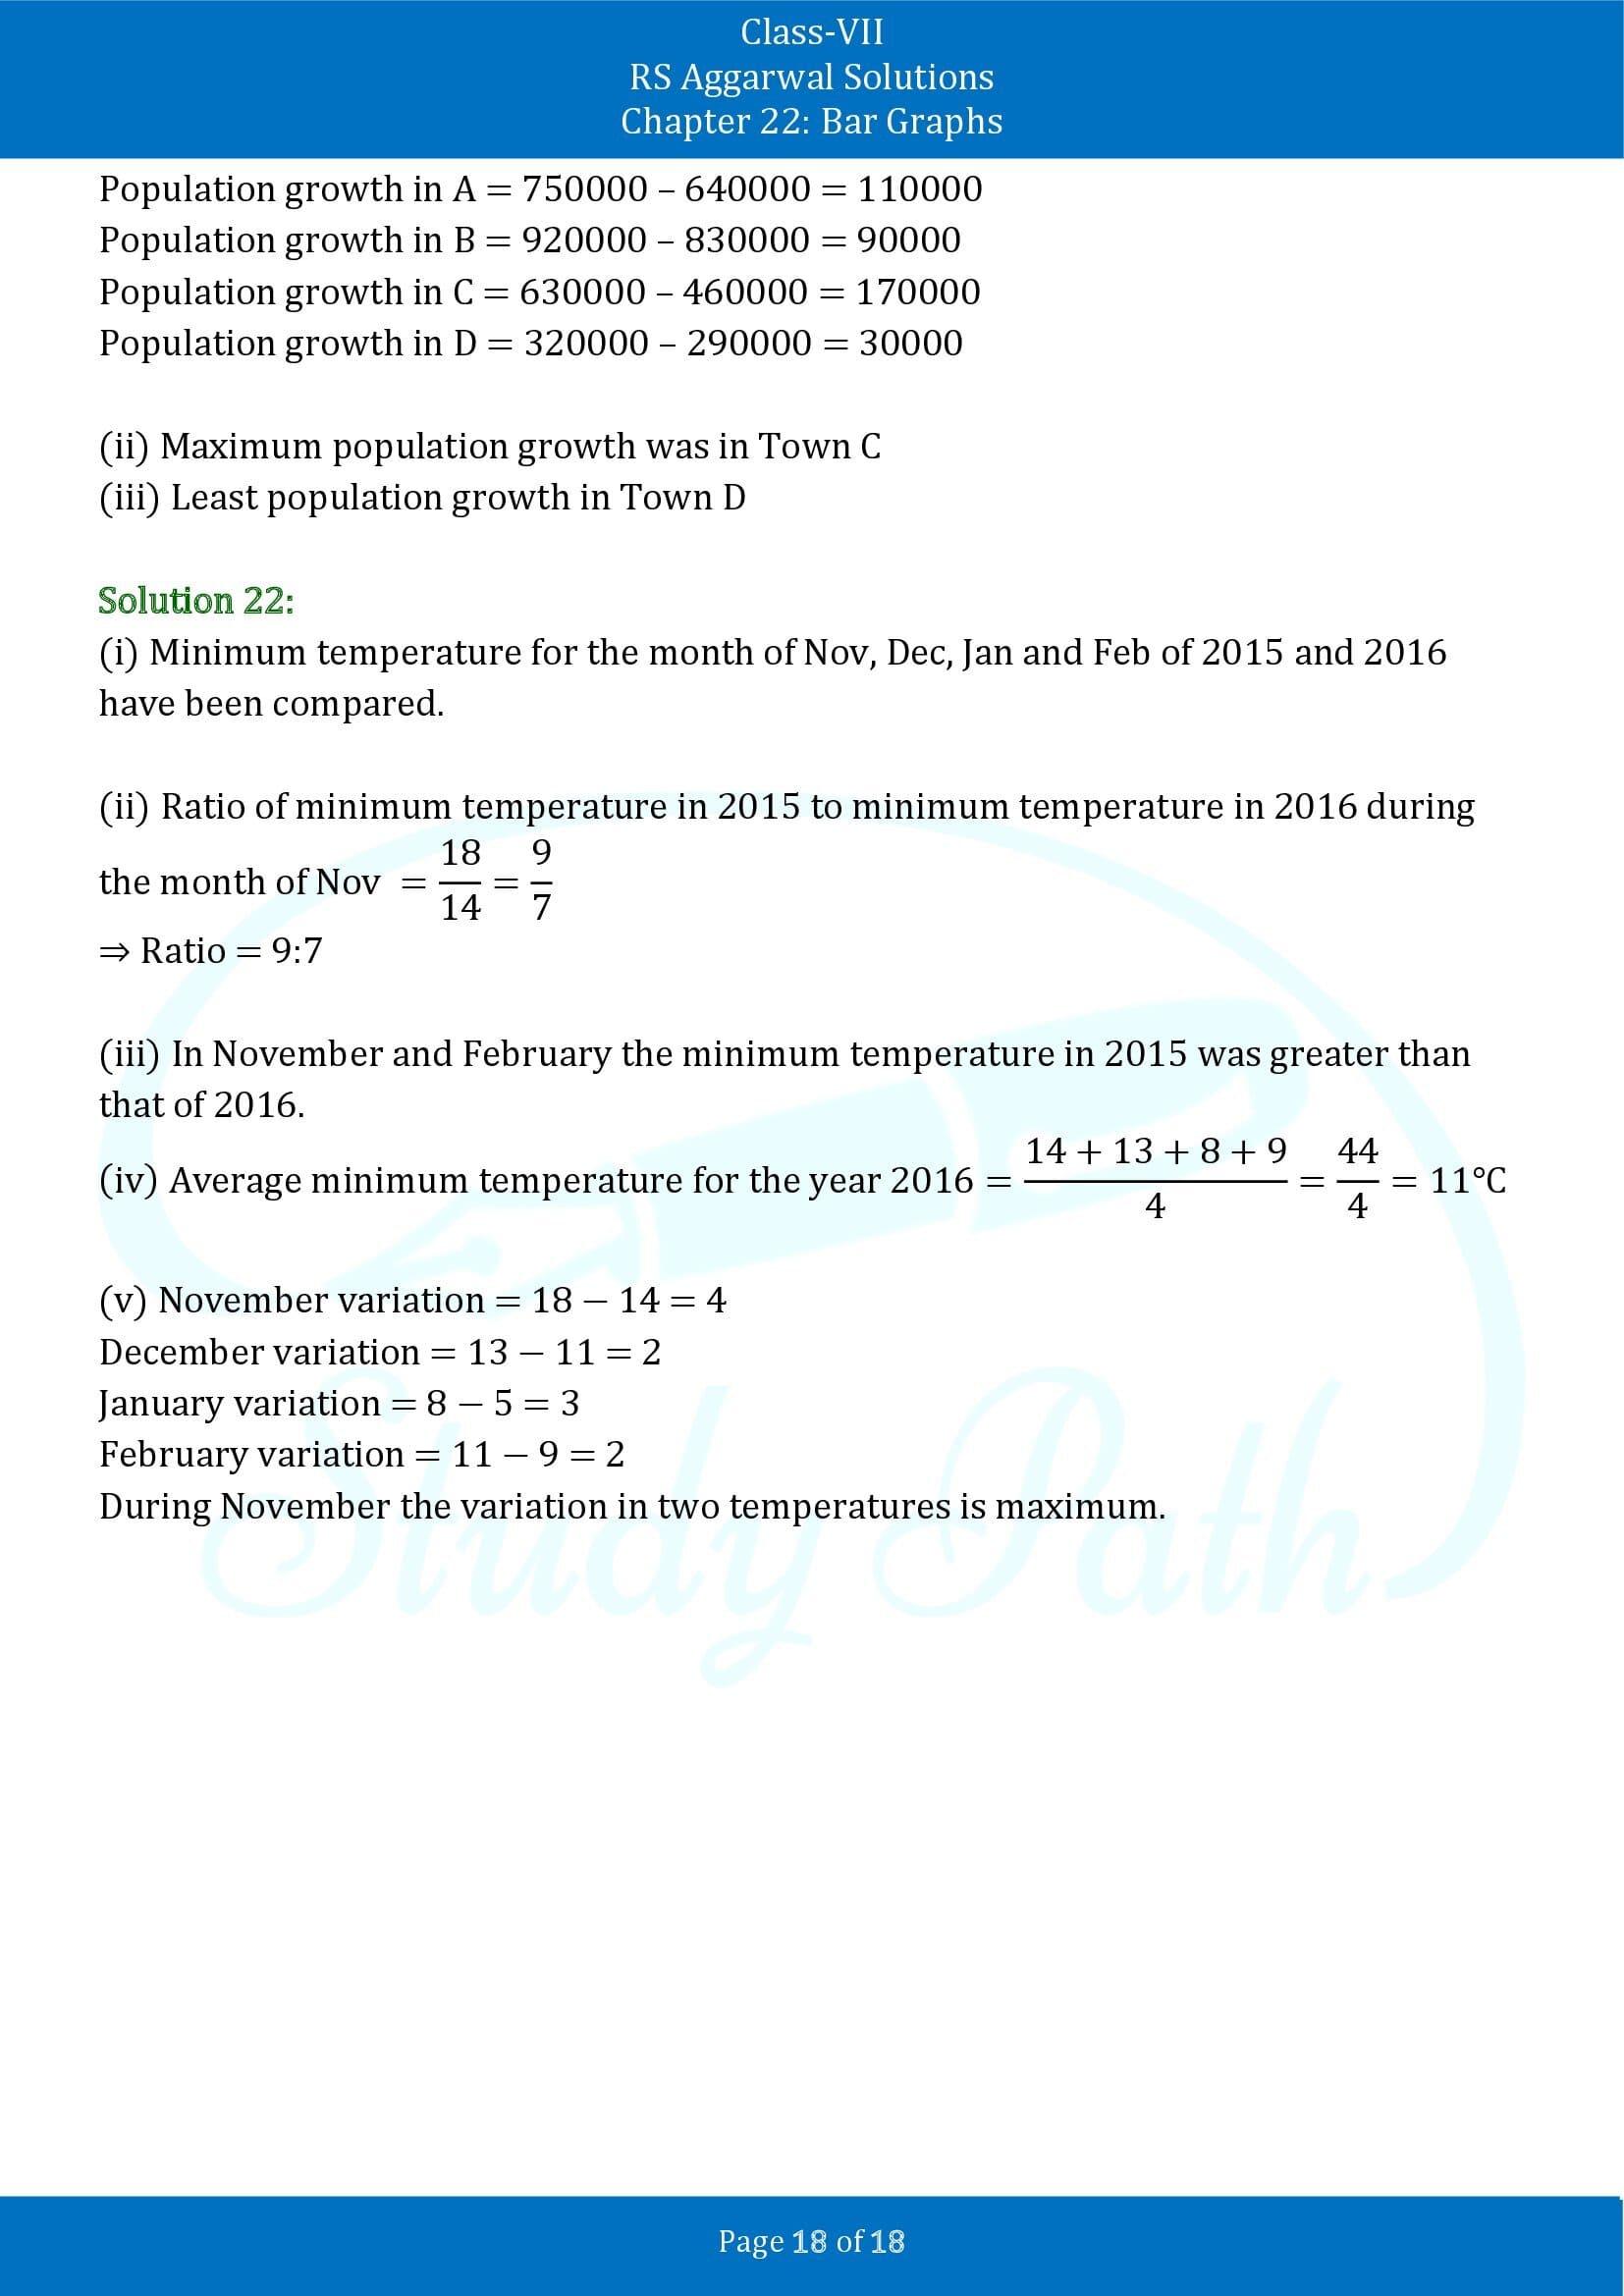 RS Aggarwal Solutions Class 7 Chapter 22 Bar Graphs 00018